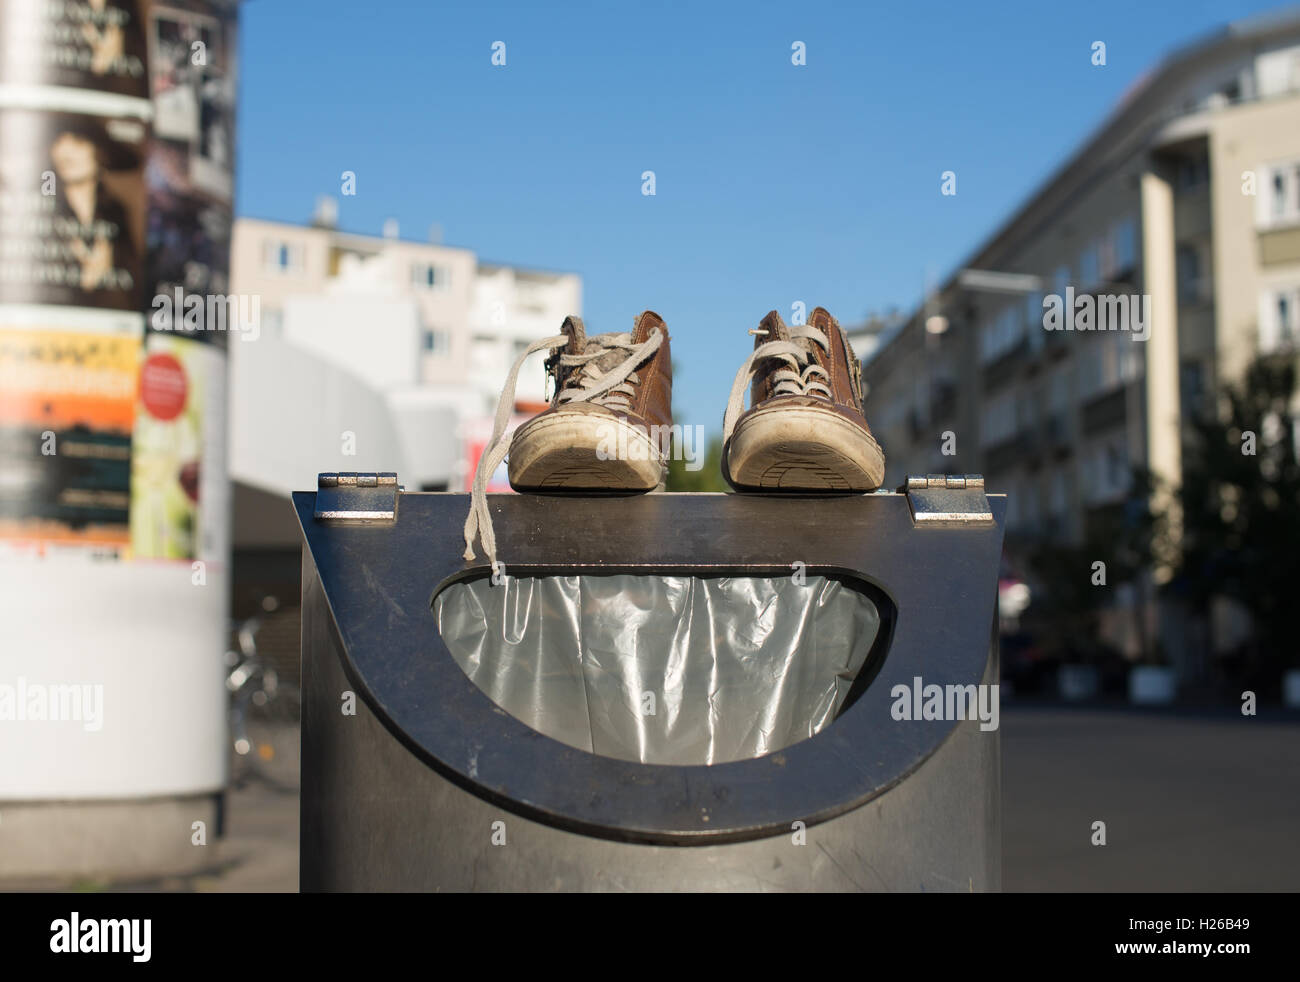 Shoes on a garbage can Stock Photo